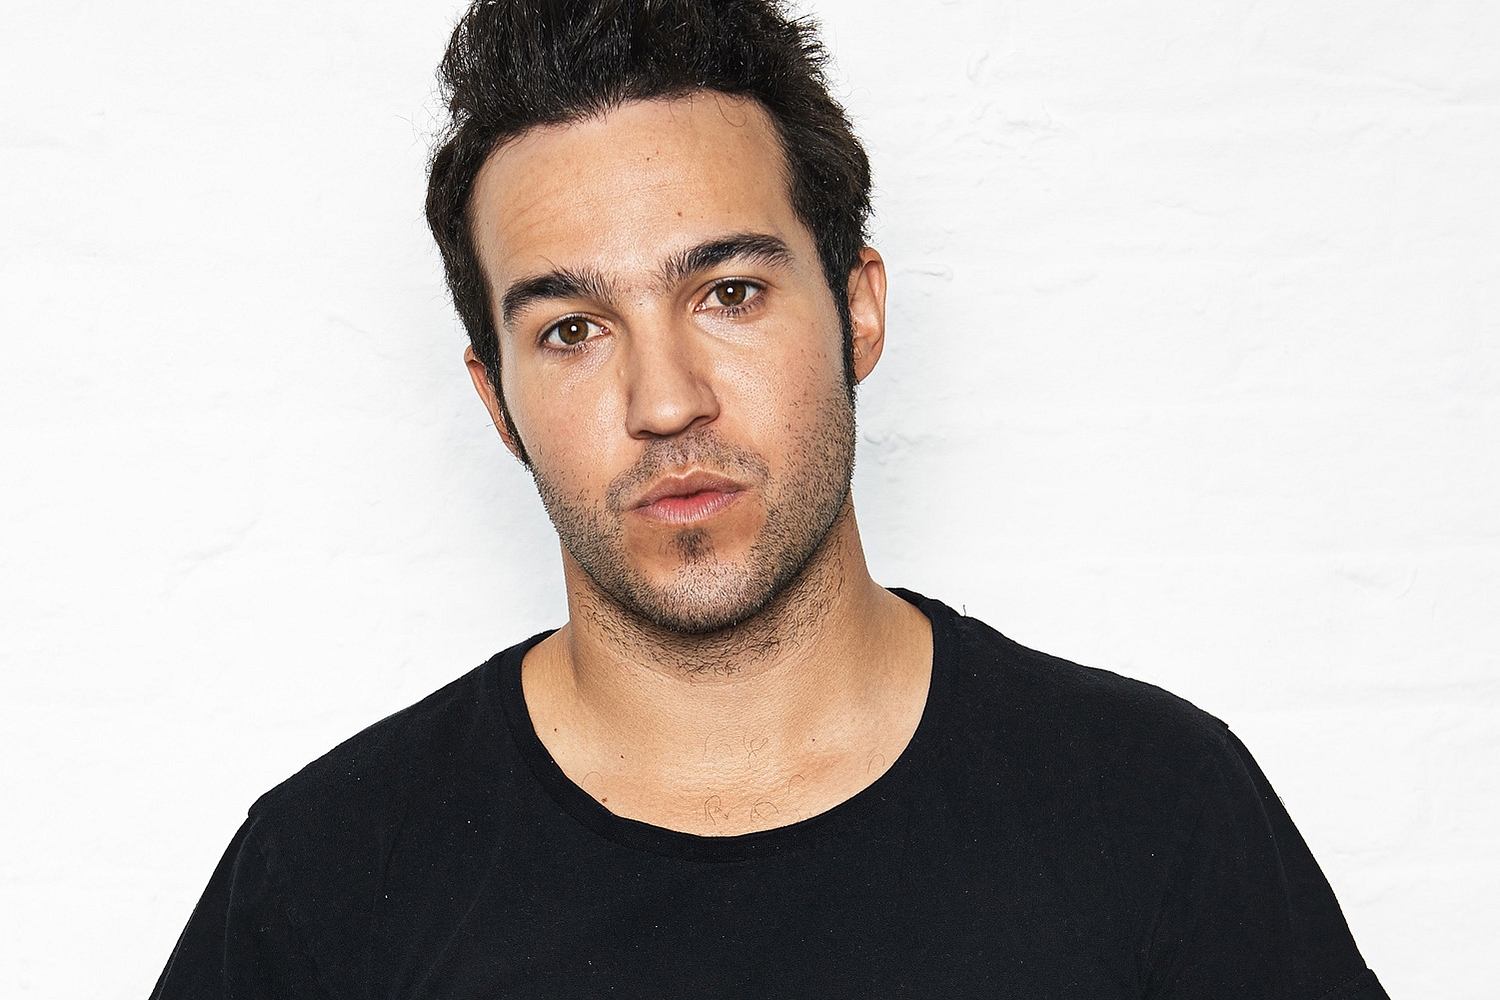 Pete Wentz relaunches label Decaydance